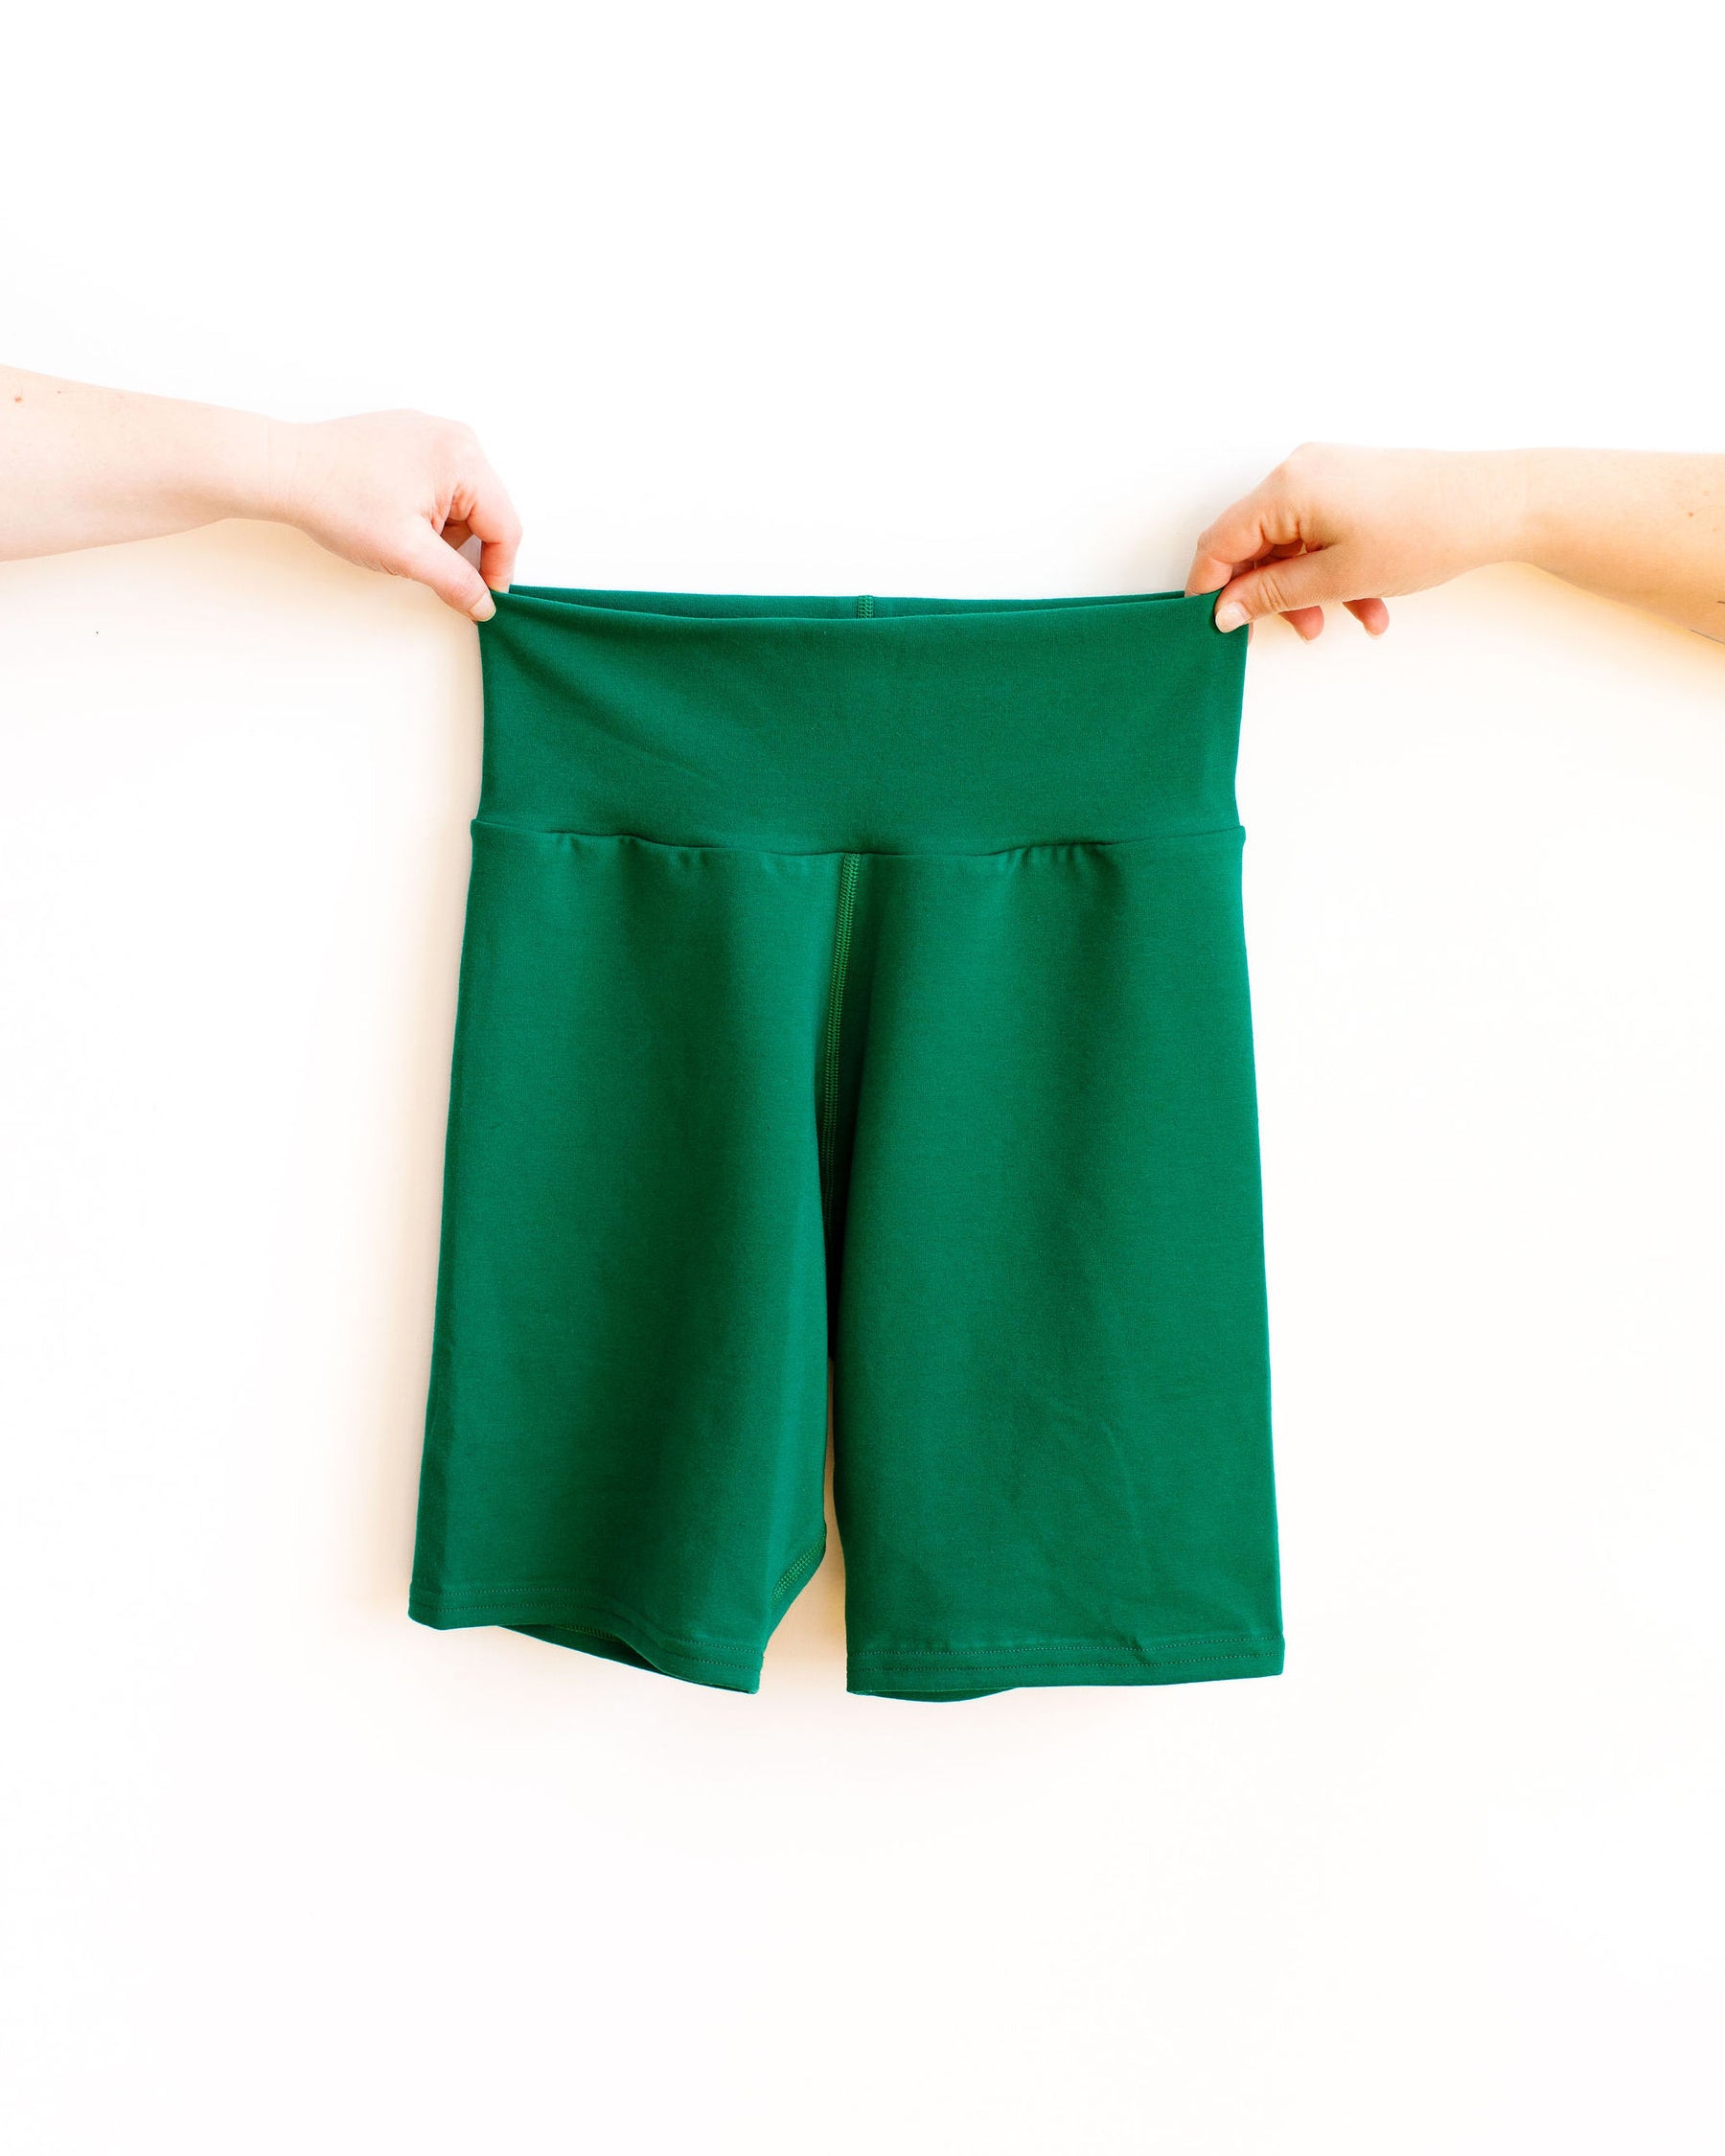 Two hands holding Emerald Green Thunderpants Bike Shorts against a white wall.